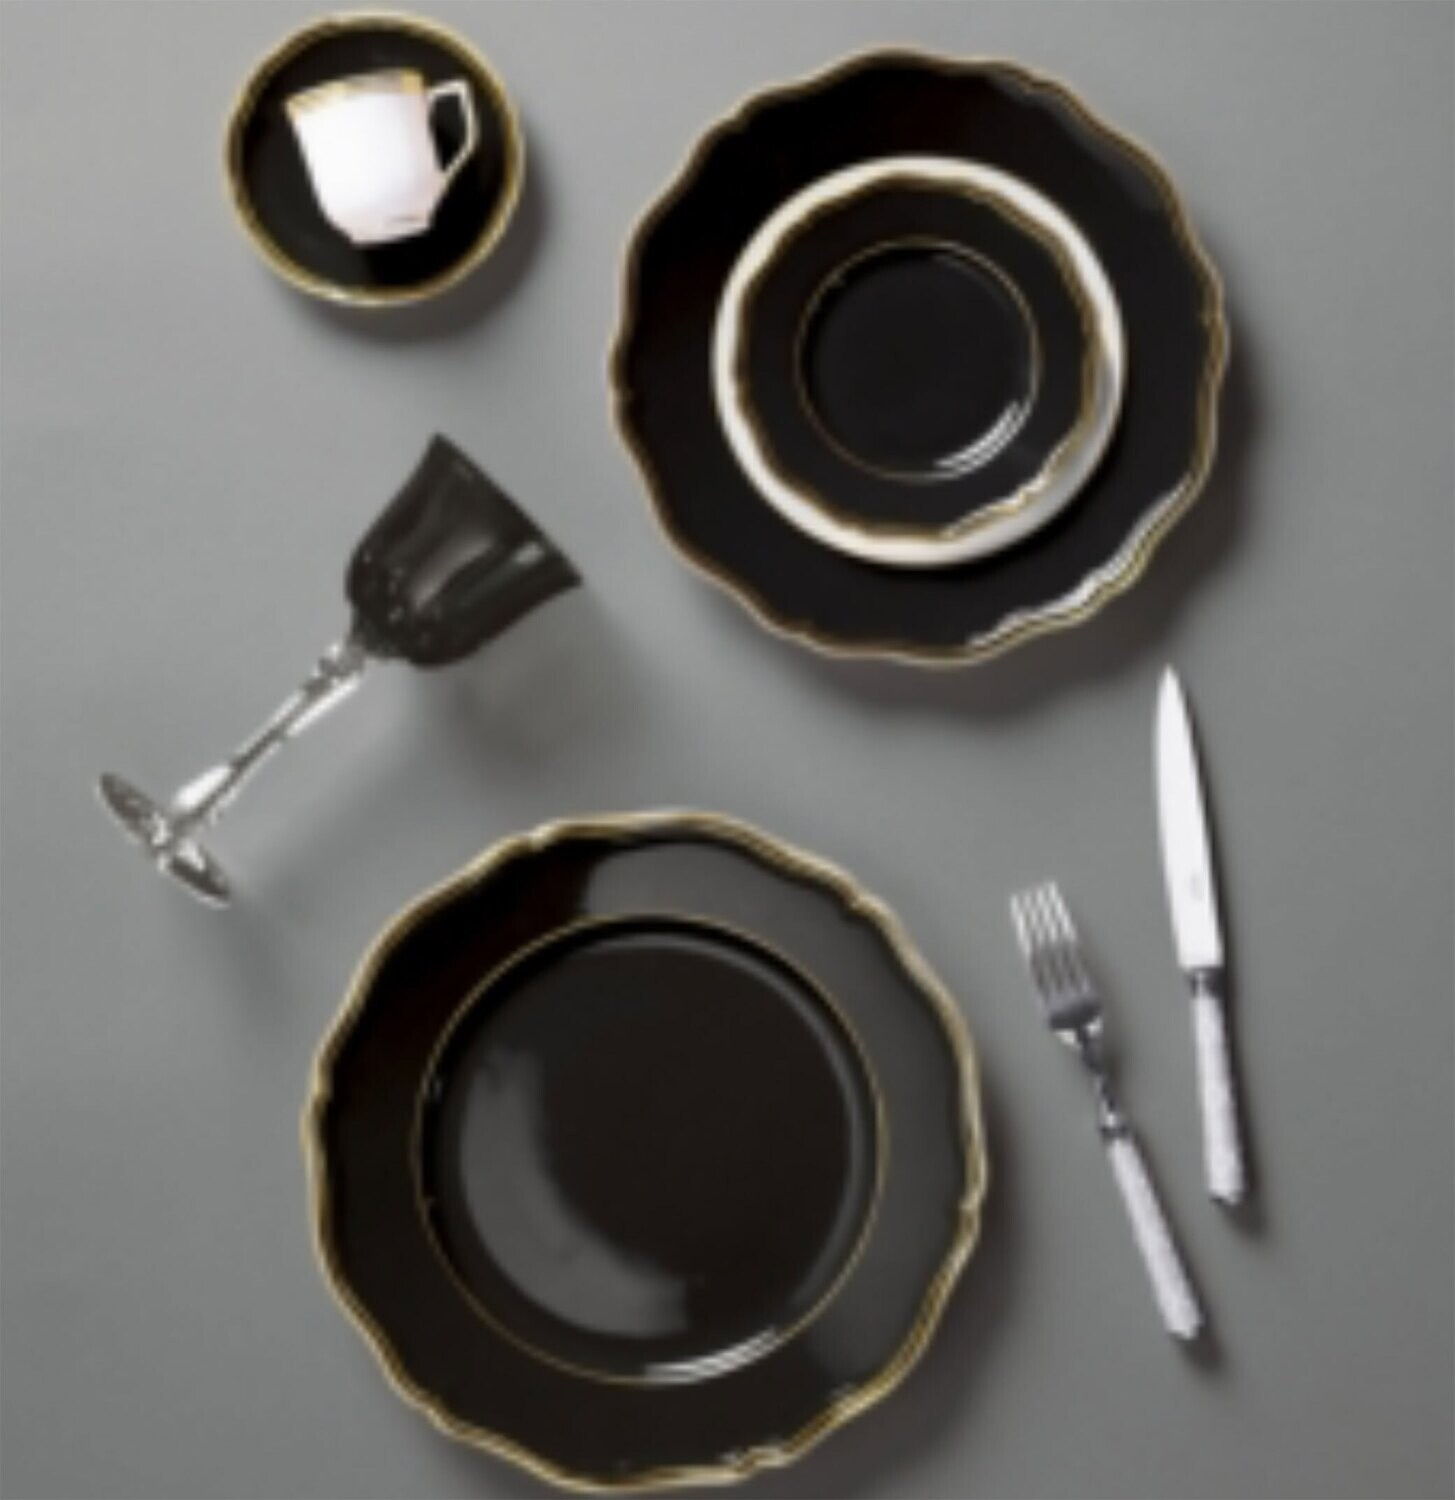 Raynaud Limoges Mazurka Or Black Petit four stand 8.7 in 0868-01-515022